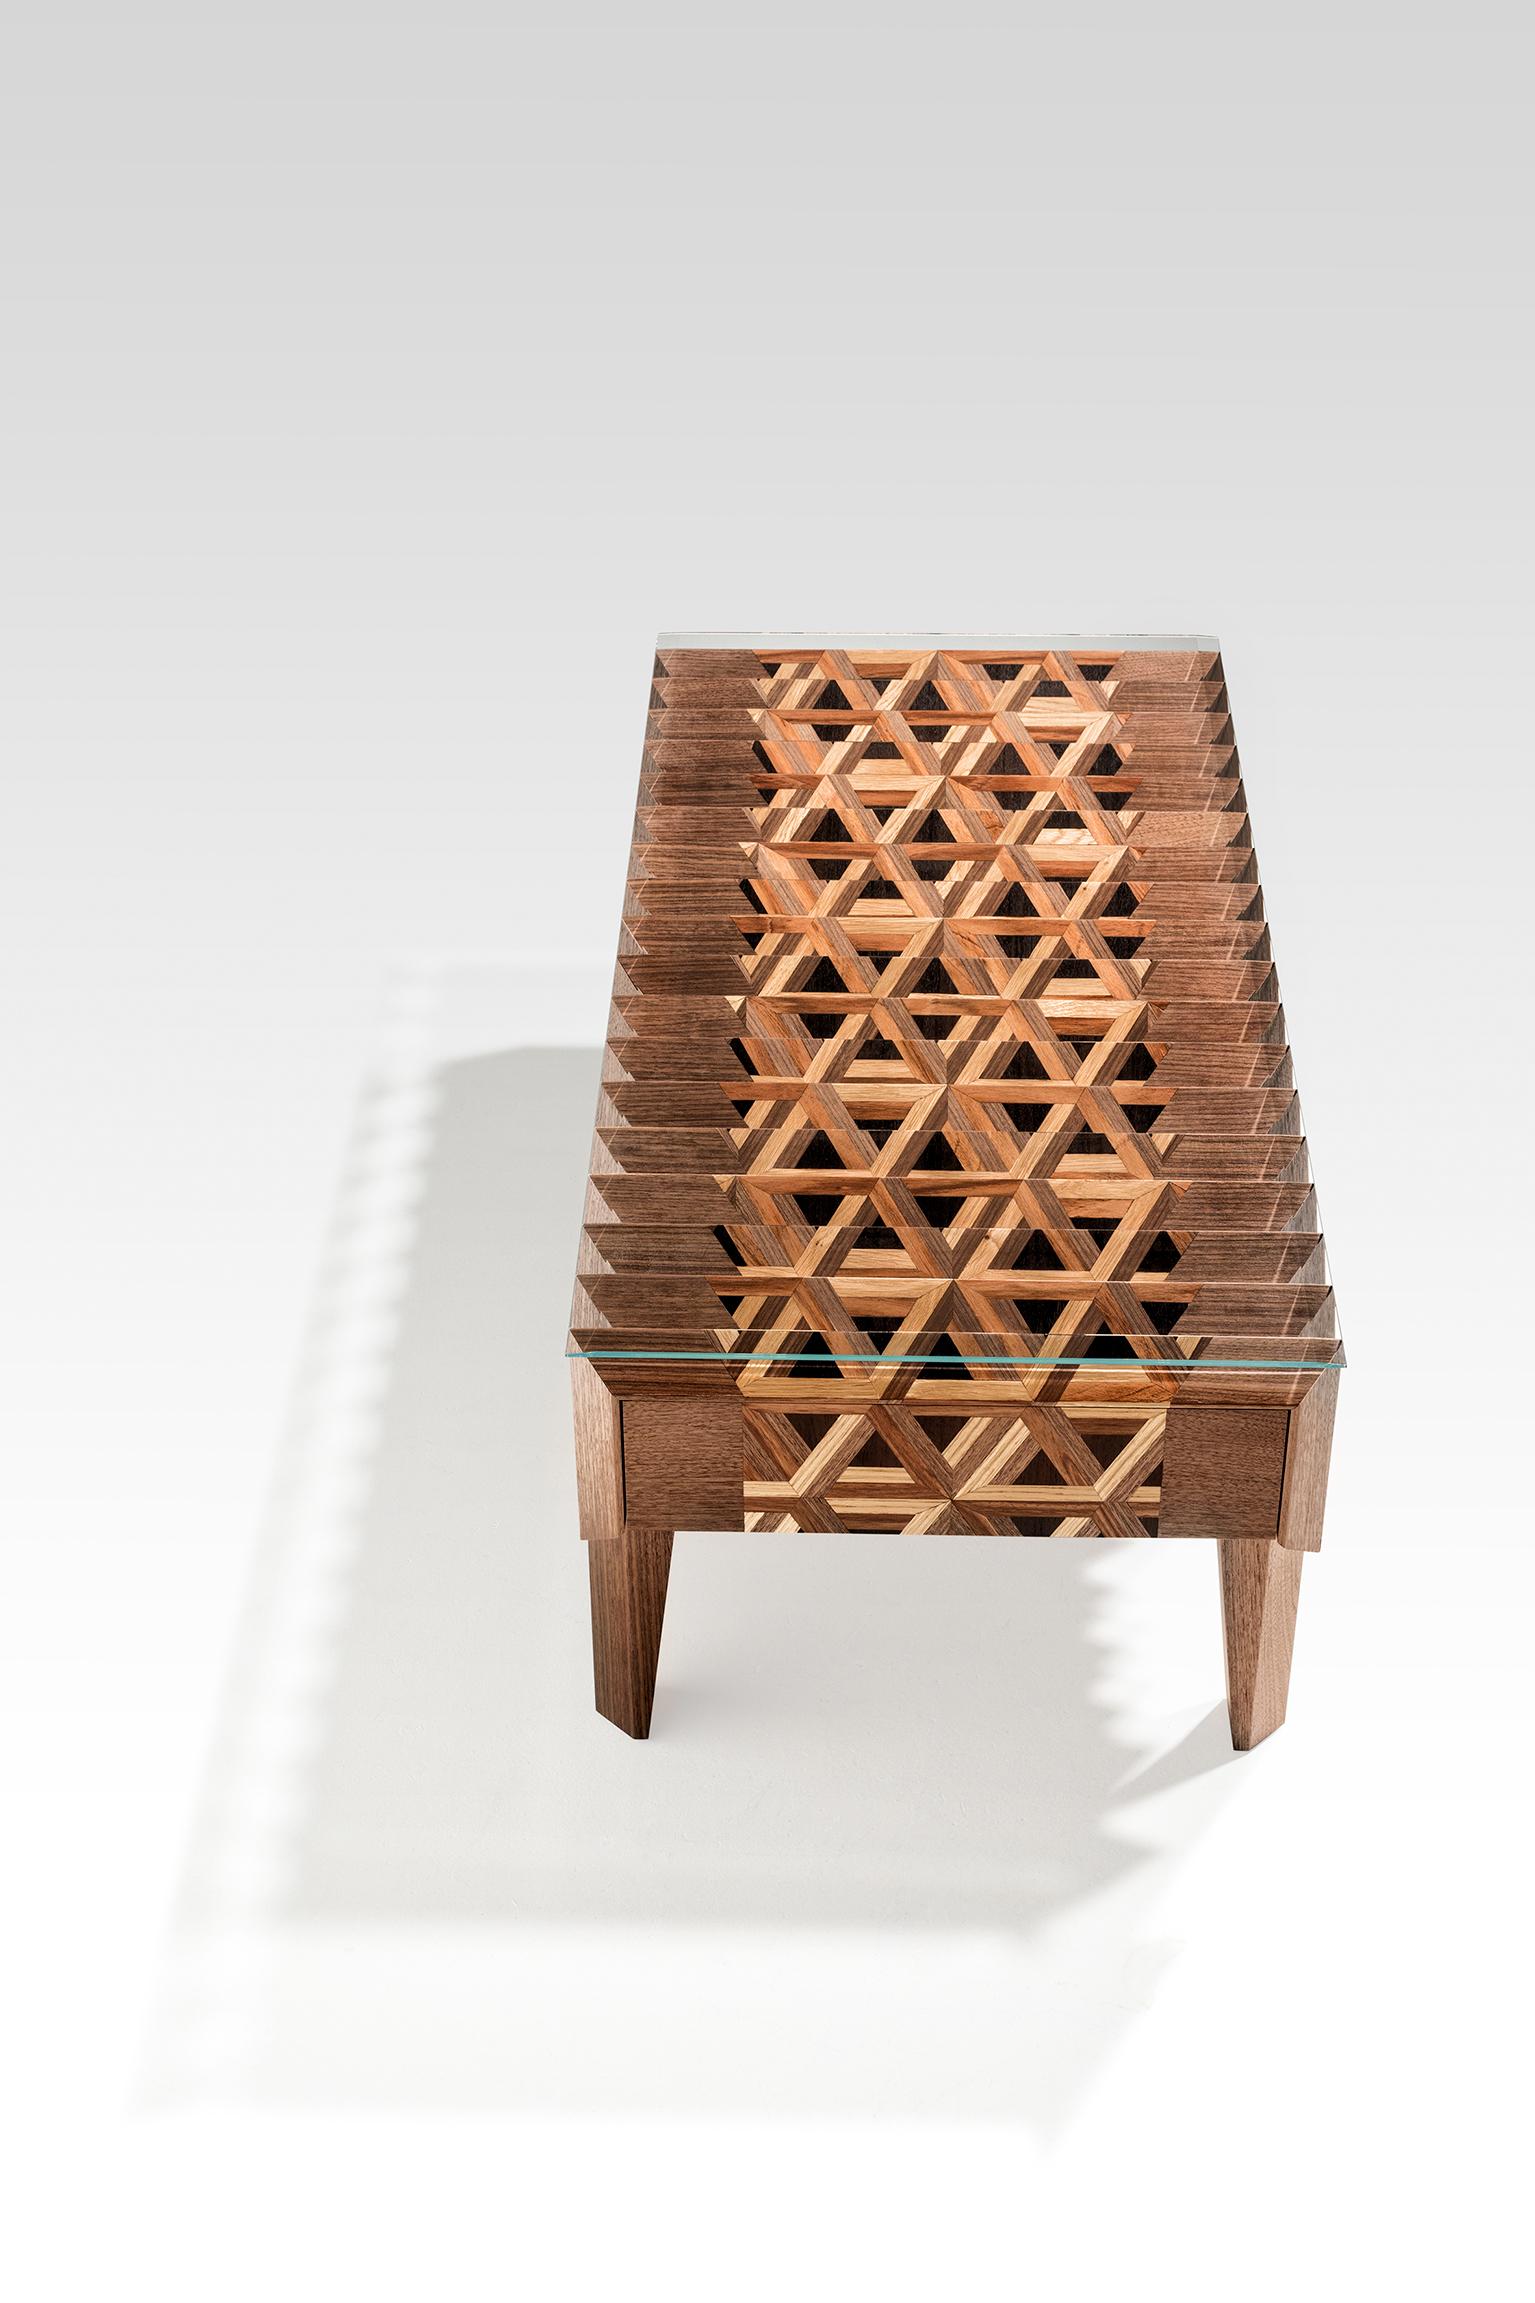 Marquetry Walnut Wood Coffee Table Triangles Pattern The Netherlands By Sordile